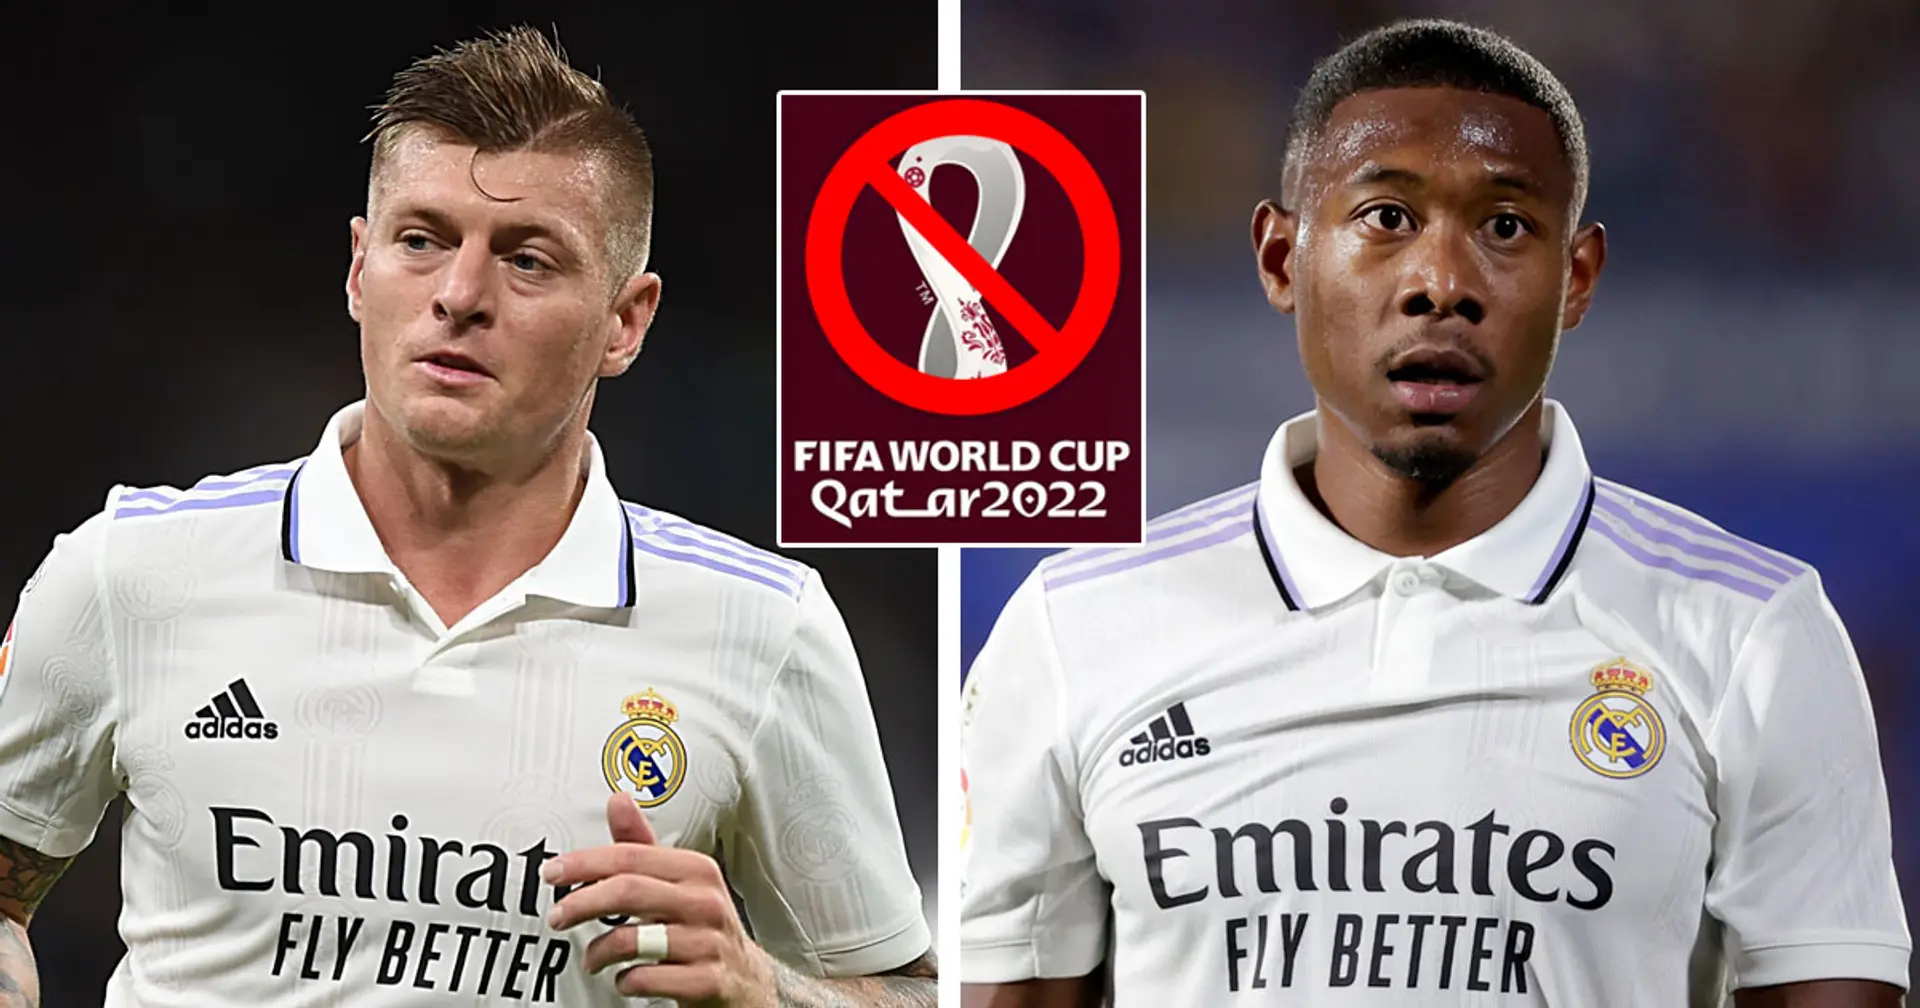 9 players left behind: full list of Real Madrid players that won't feature at 2022 World Cup